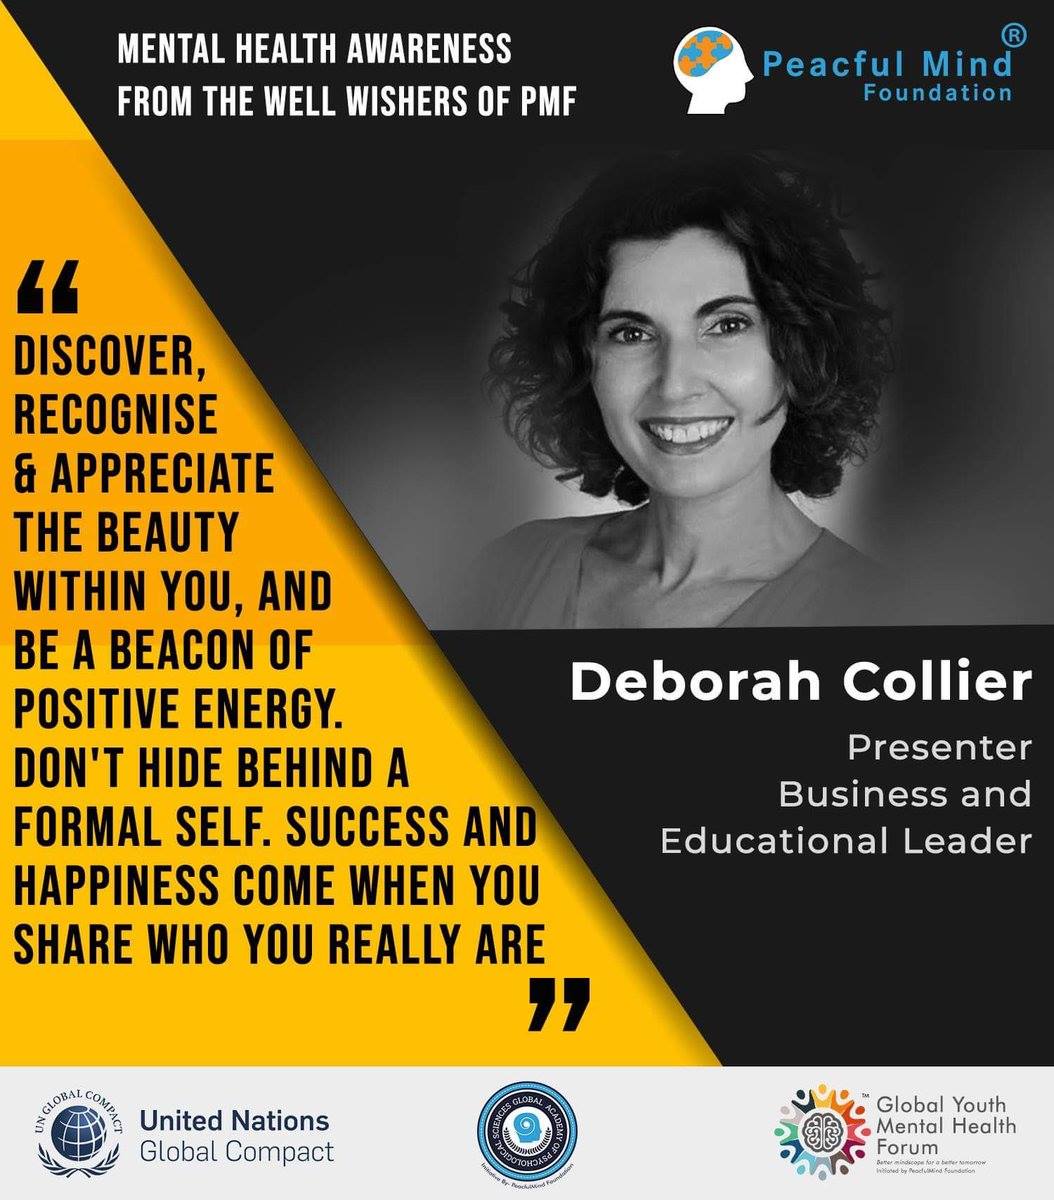 "Discover, recognise & appreciate the beauty within you, and be a beacon of positive energy. Don't hide behind a formal self. Success and happiness come when you share who you really are.", Deborah Collier for Peacful Mind Foundation in collaboration with United Nations.